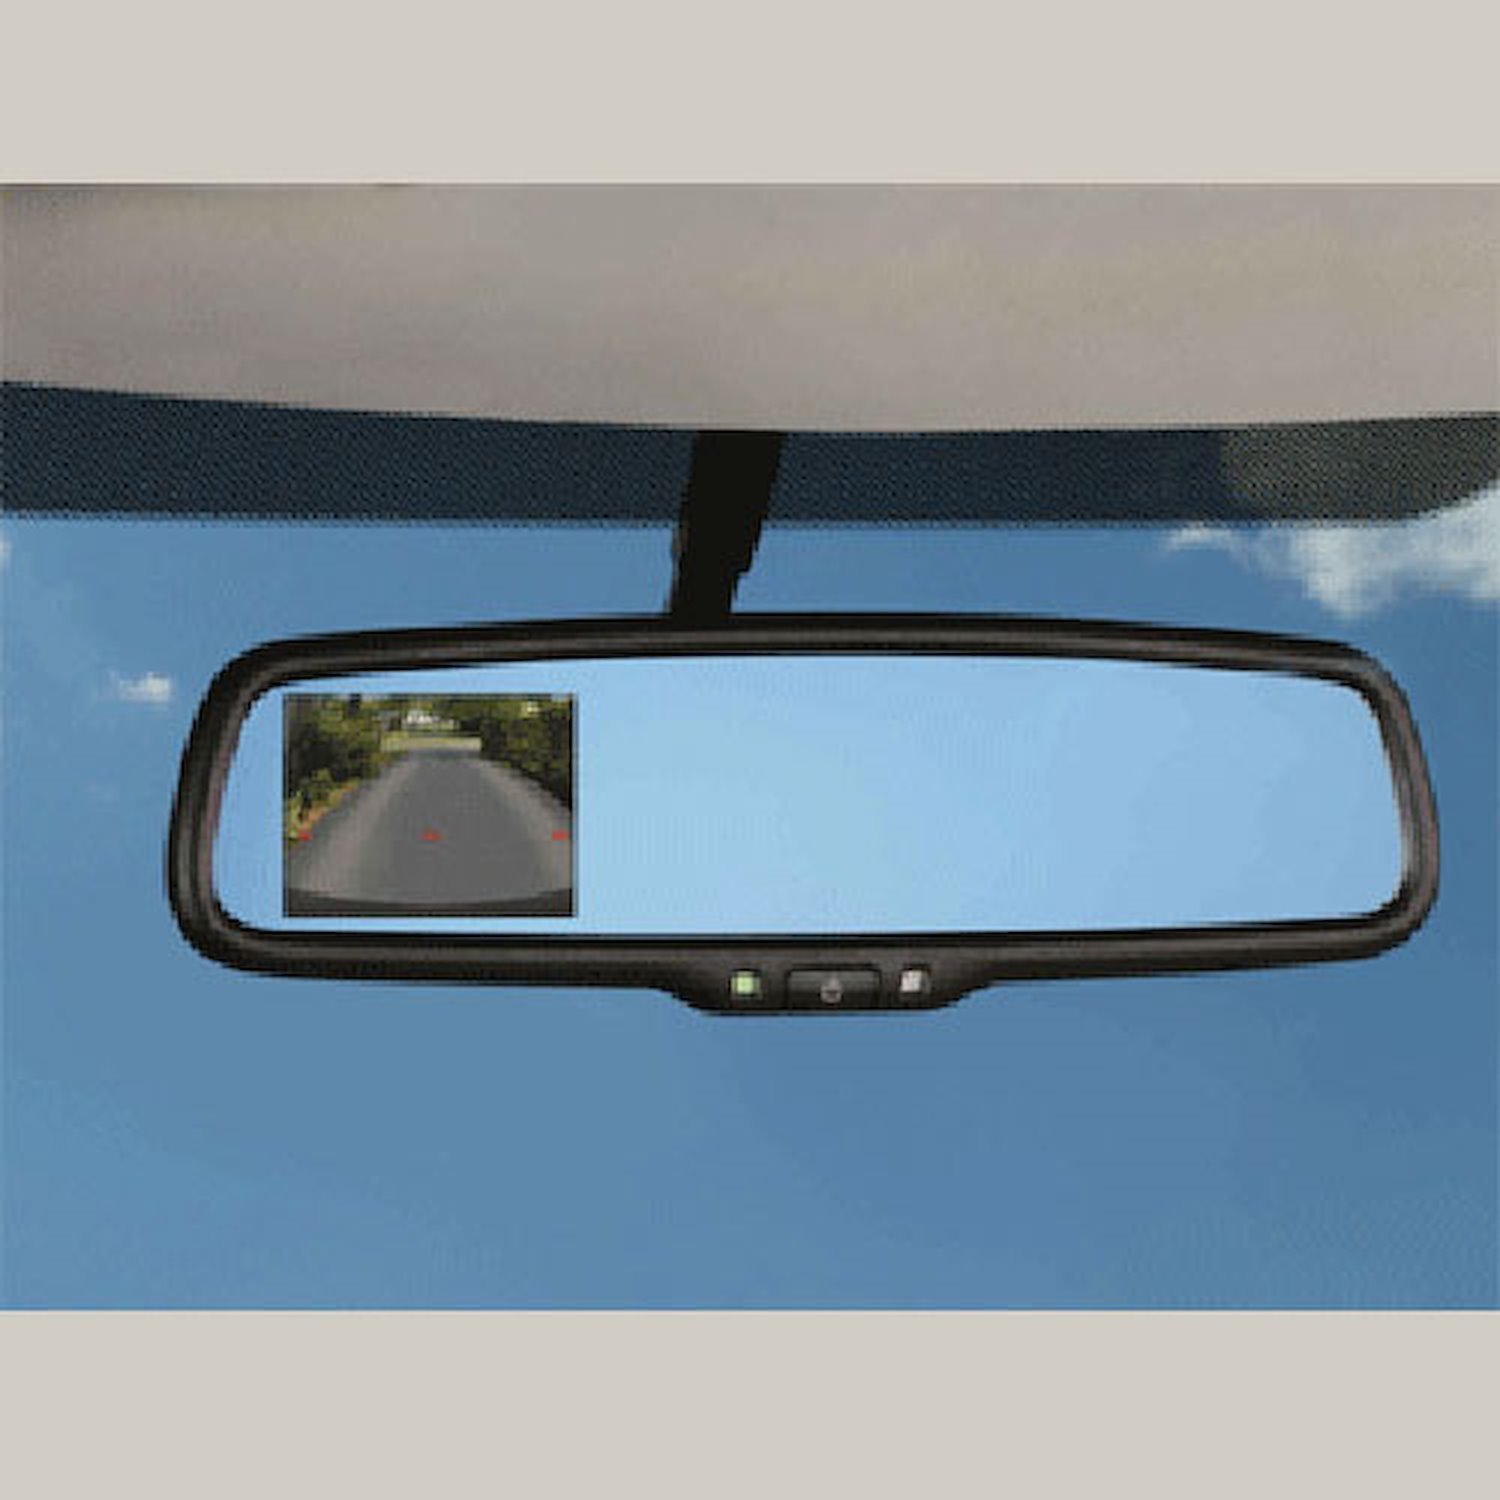 Rear View Camera System Chrysler/Dodge/Jeep Complete Kit Includes: